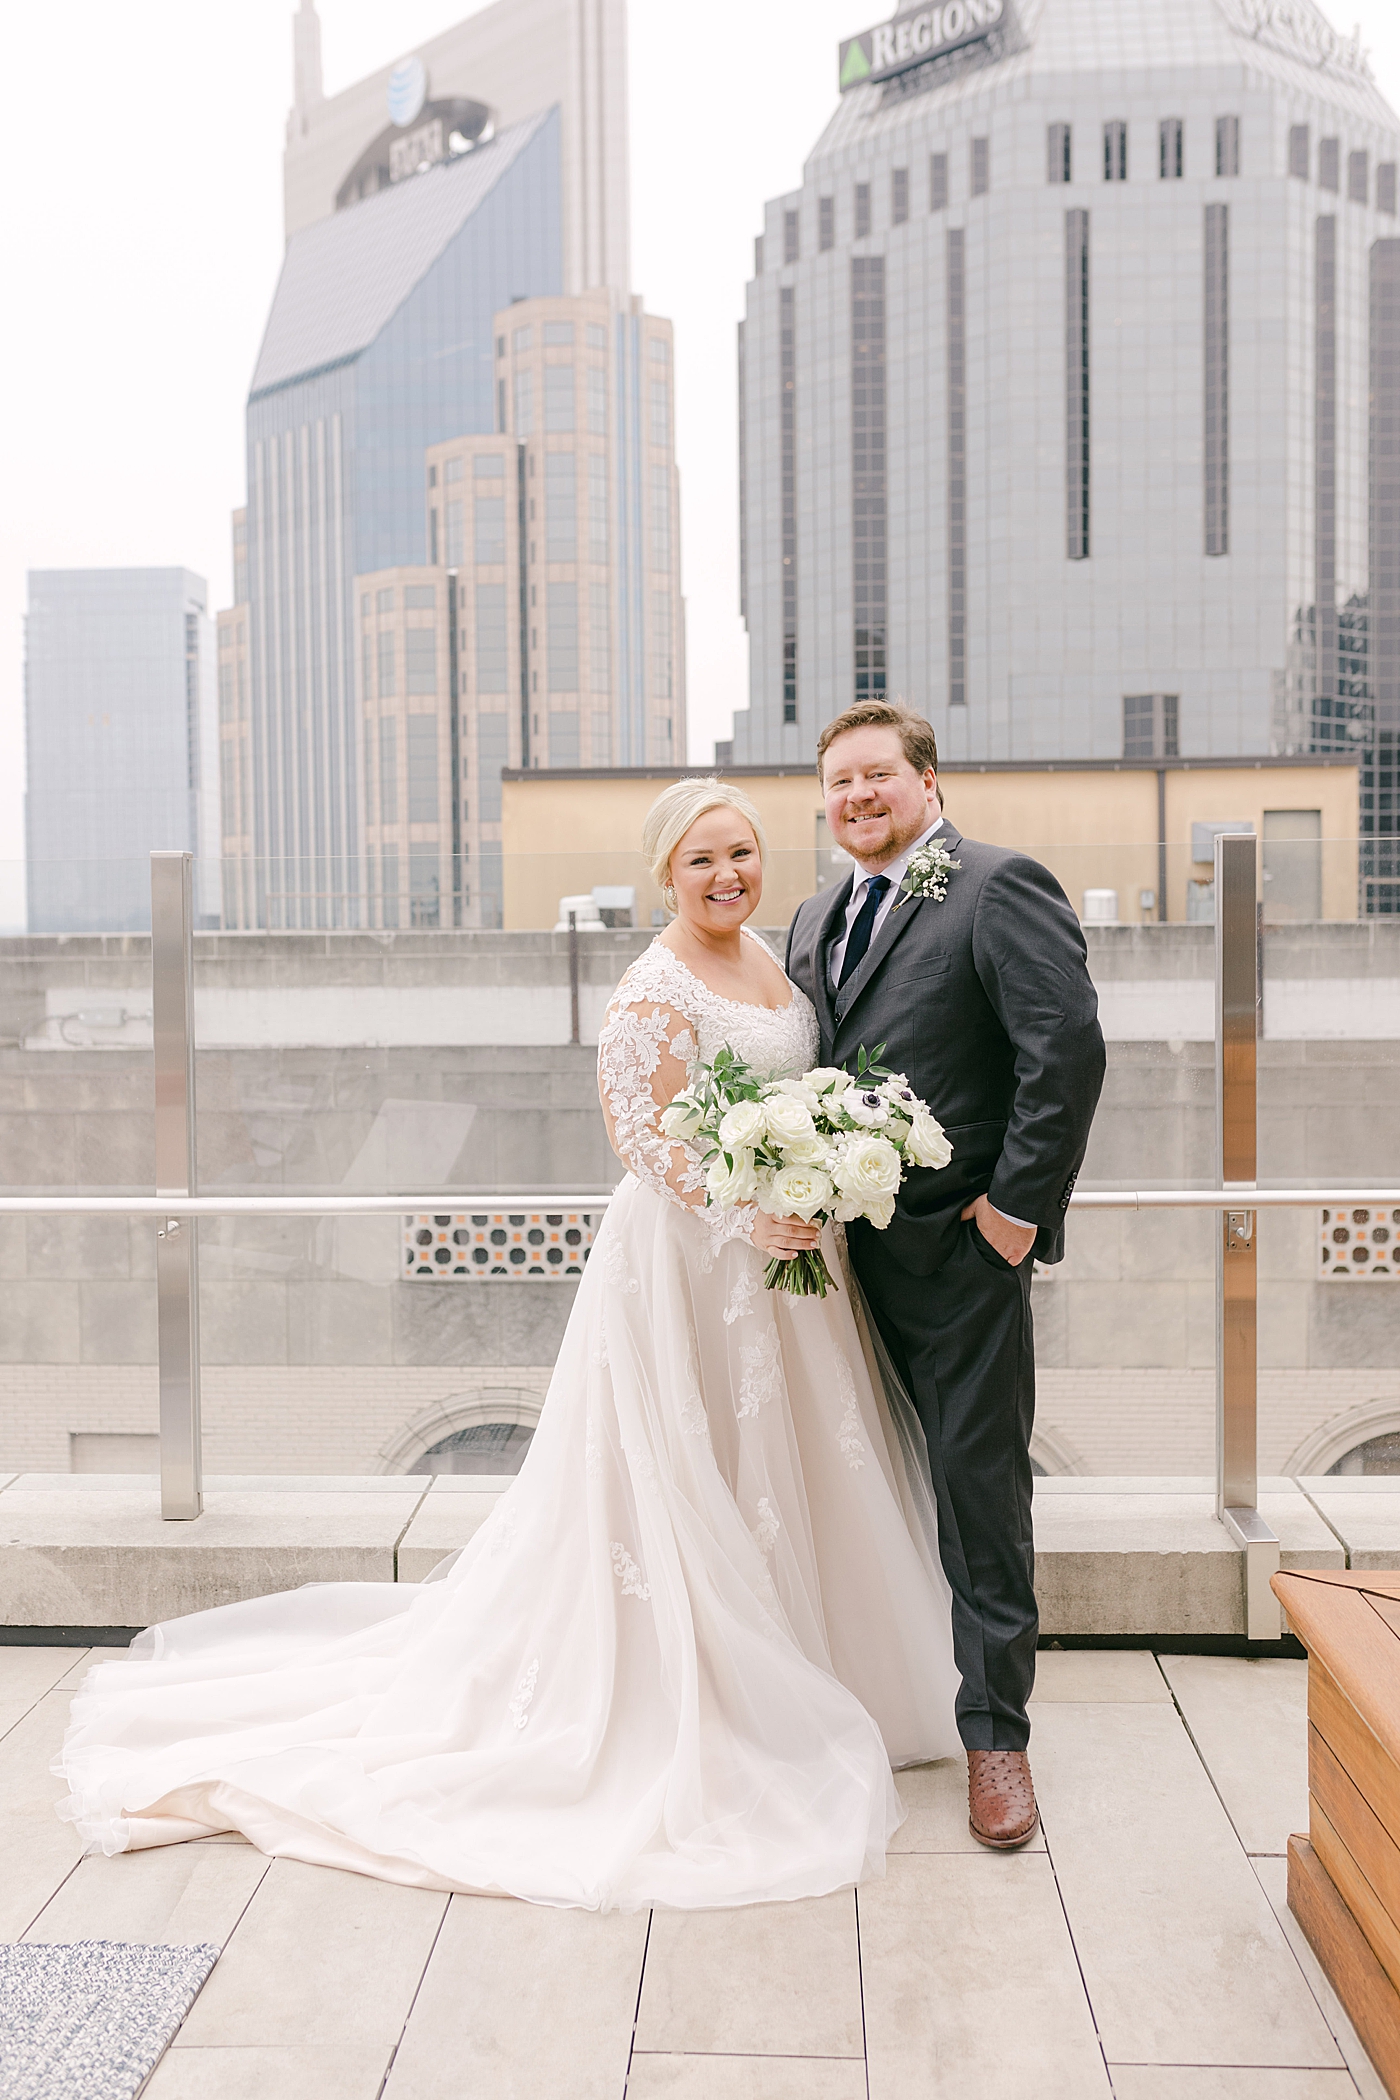 Bride and groom smiling standing on a rooftop in Nashville | Photo by Hope Helmuth Photography